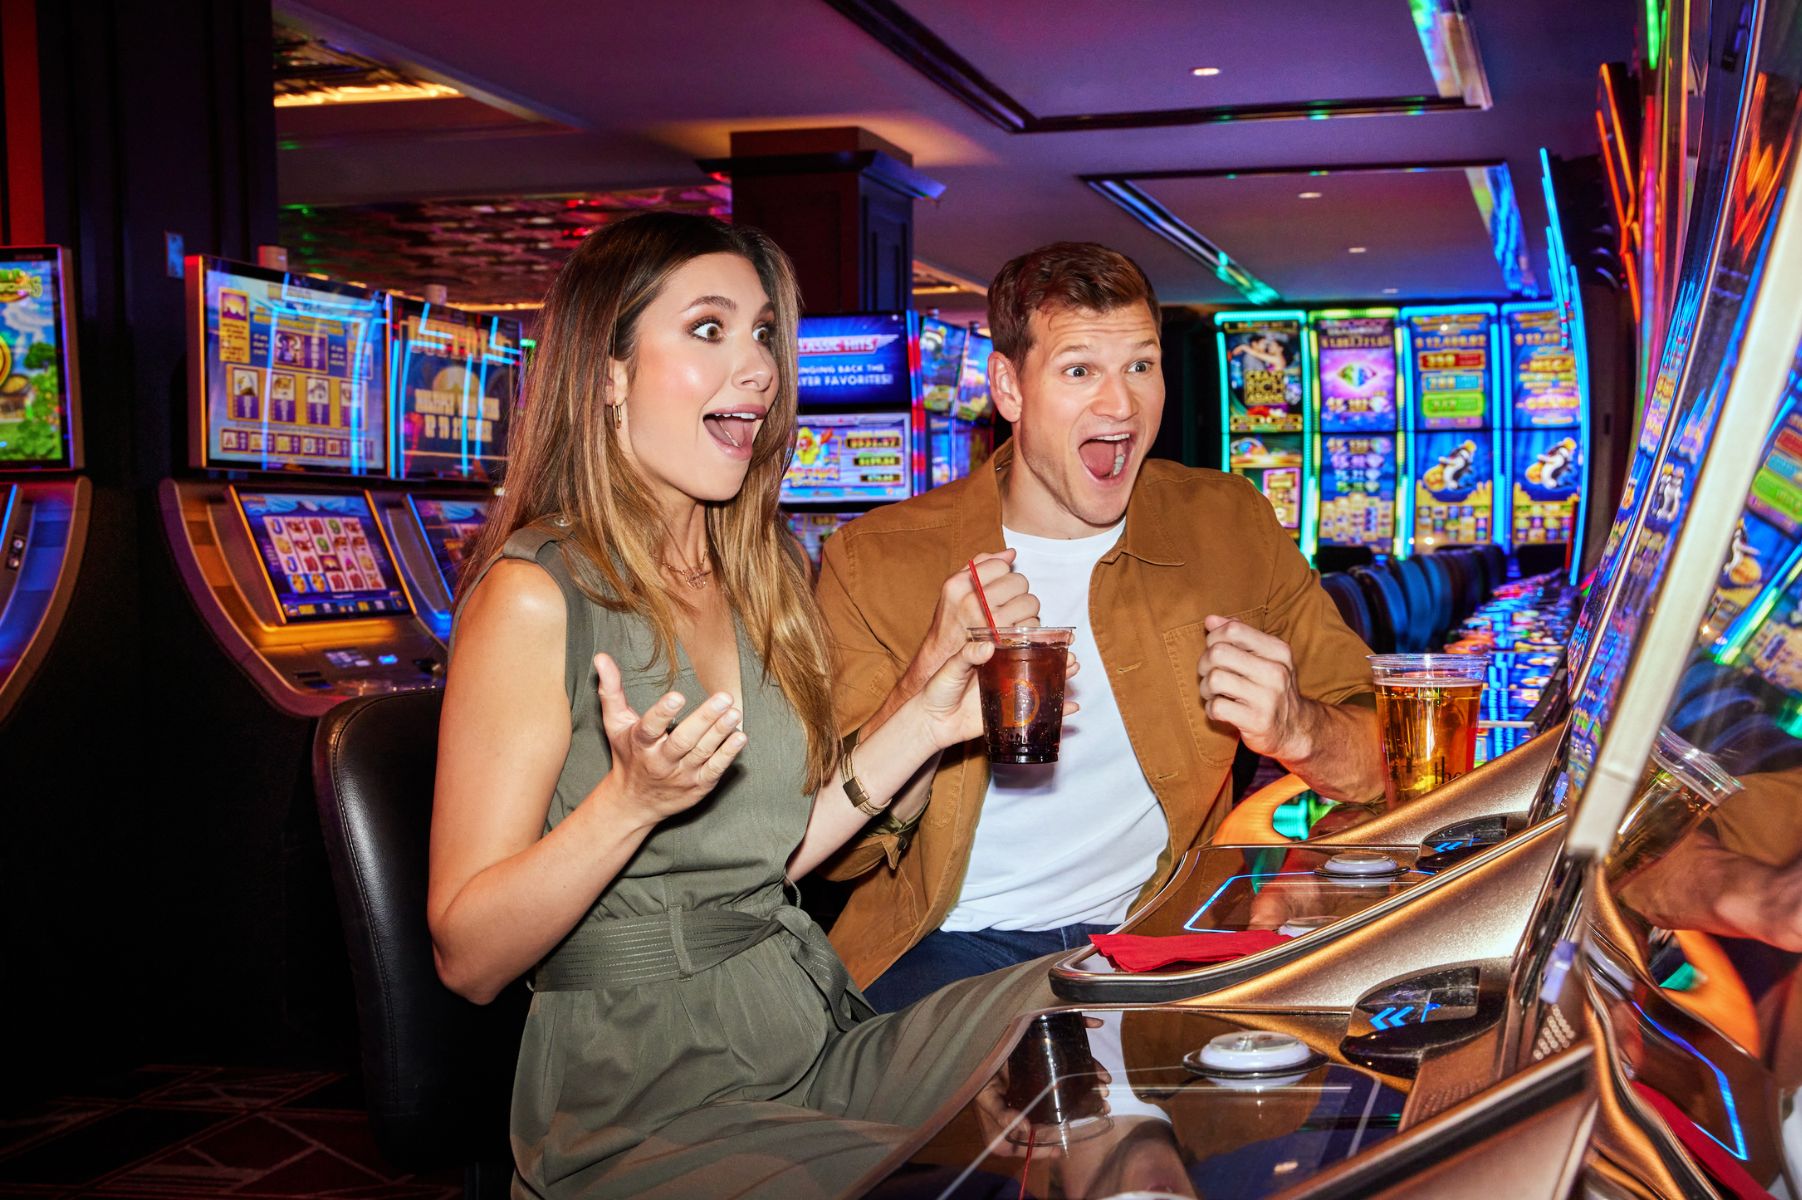 couple excited after winning on slots machines in casino